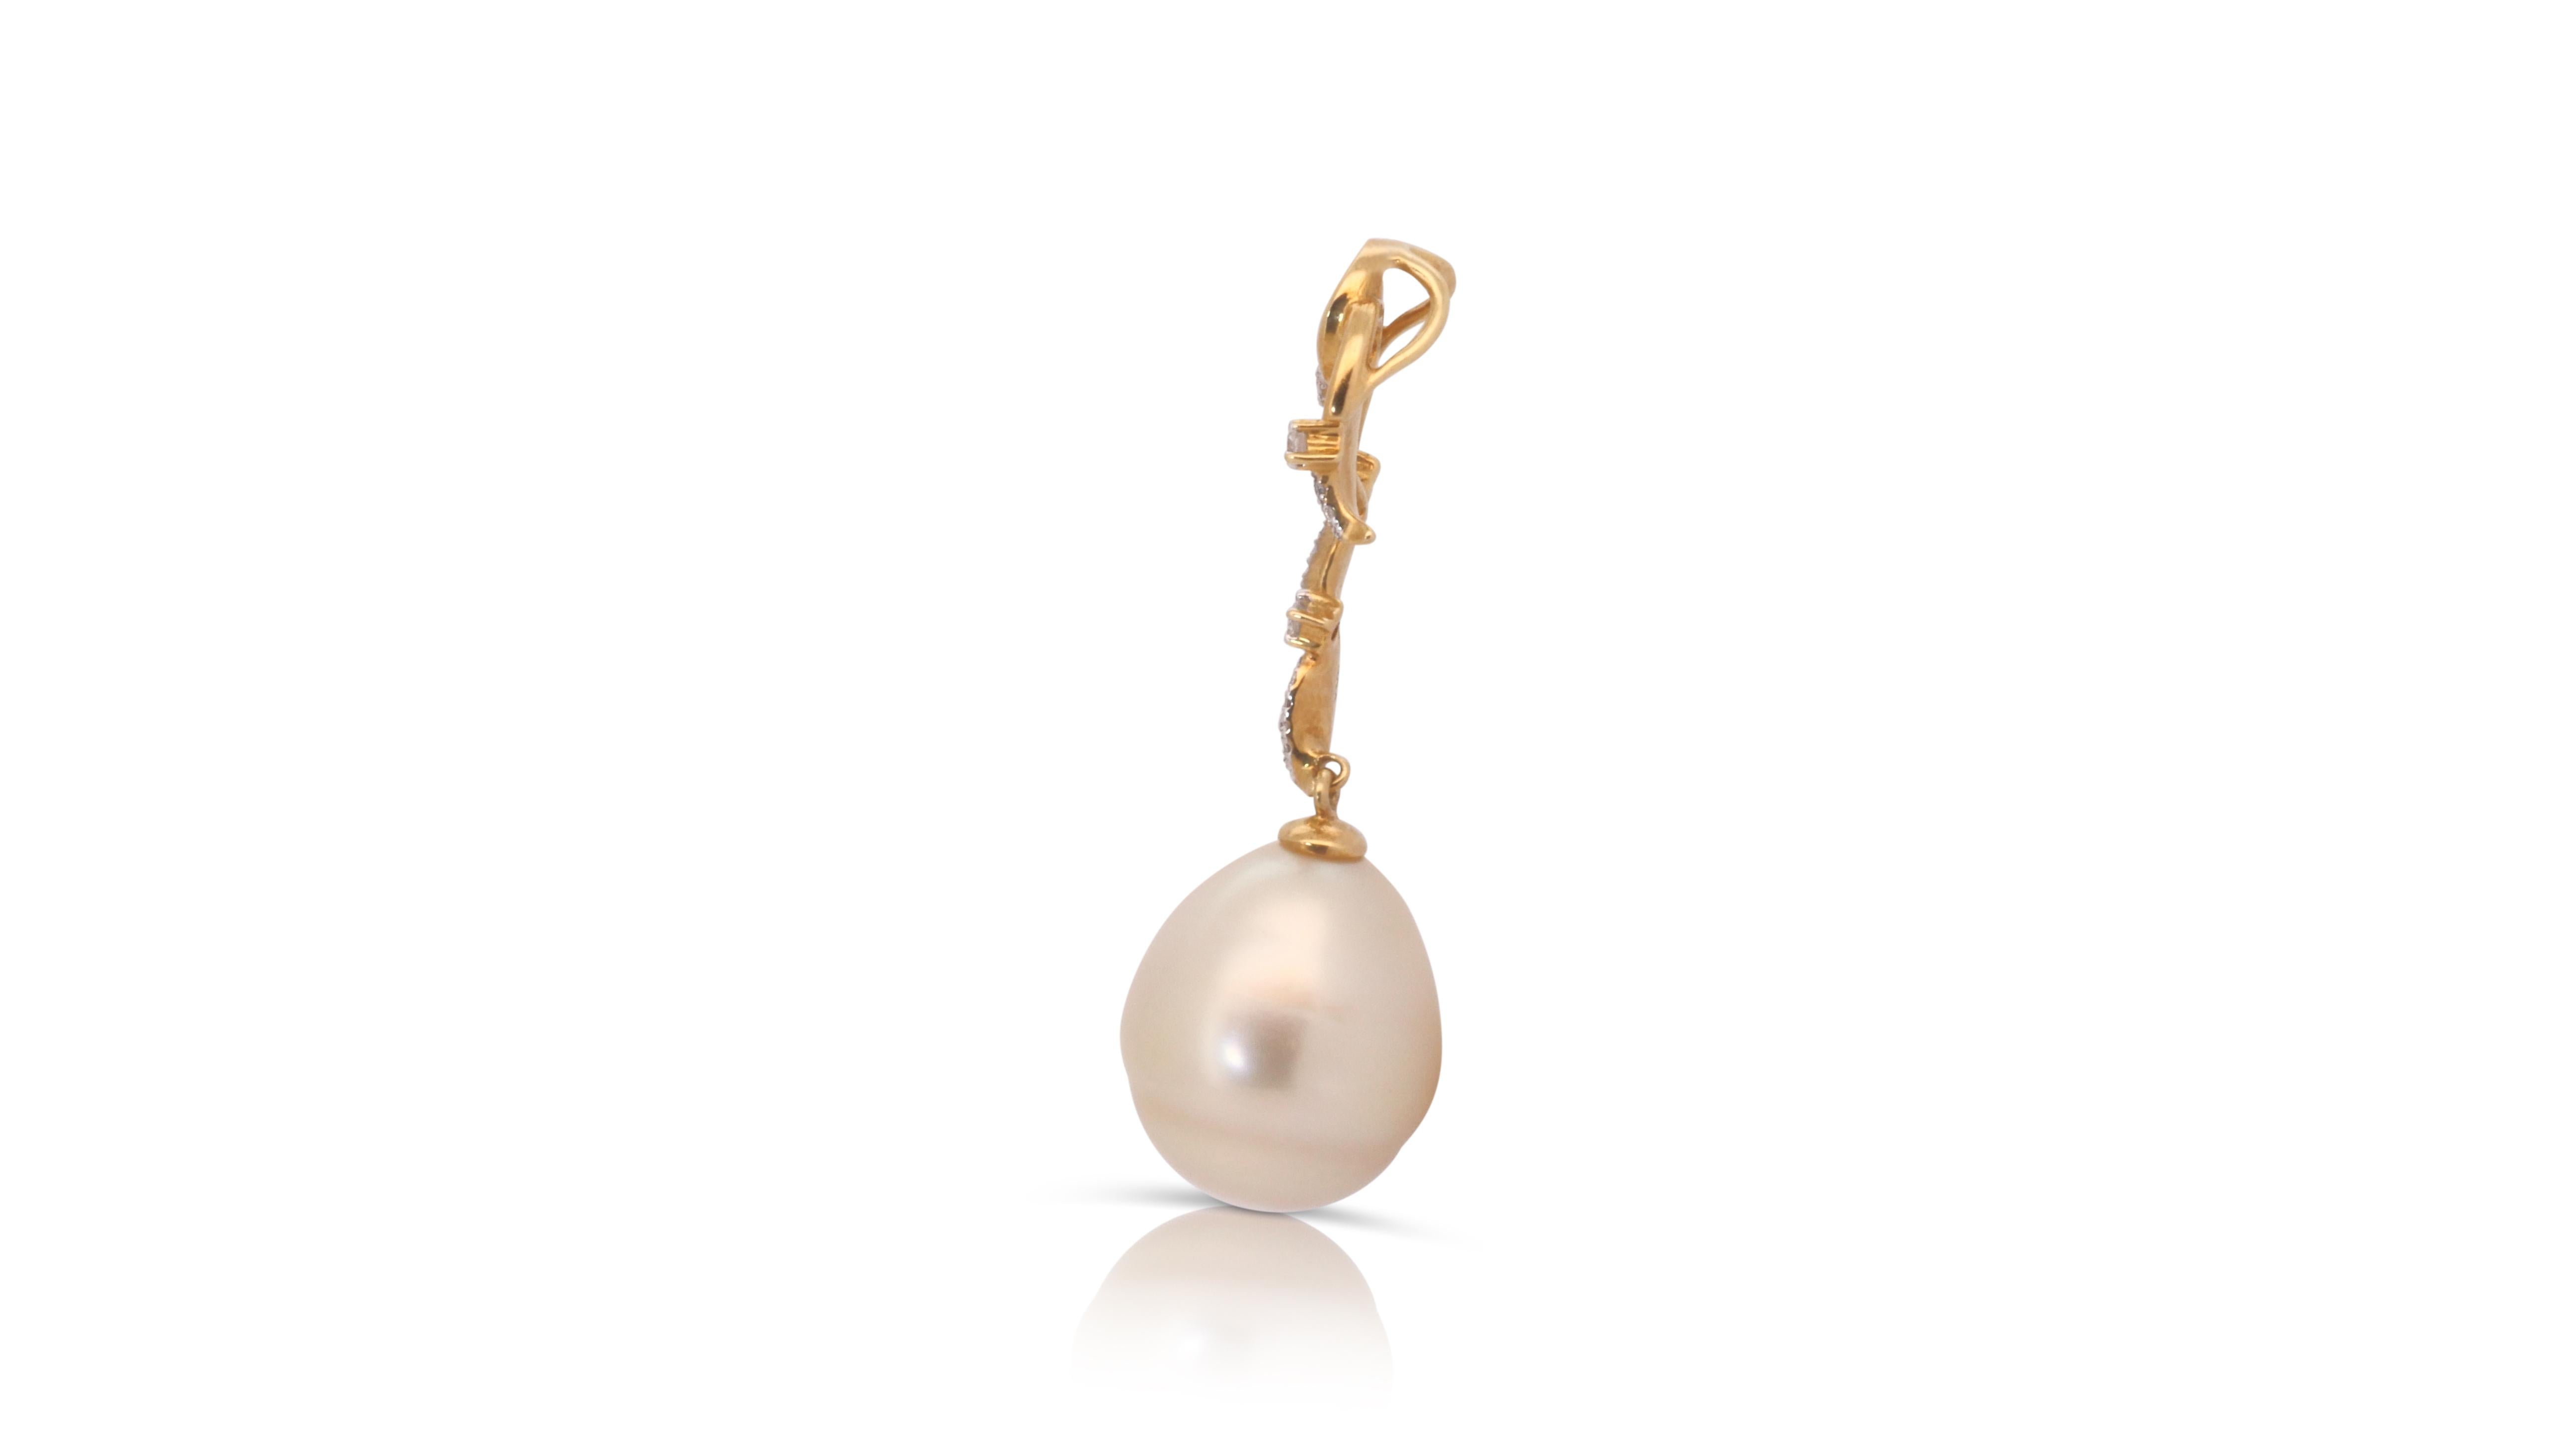 Splendid 18k Yellow Gold Pendant w/0.1 Carat Pearl & Diamonds-Chain not included For Sale 2